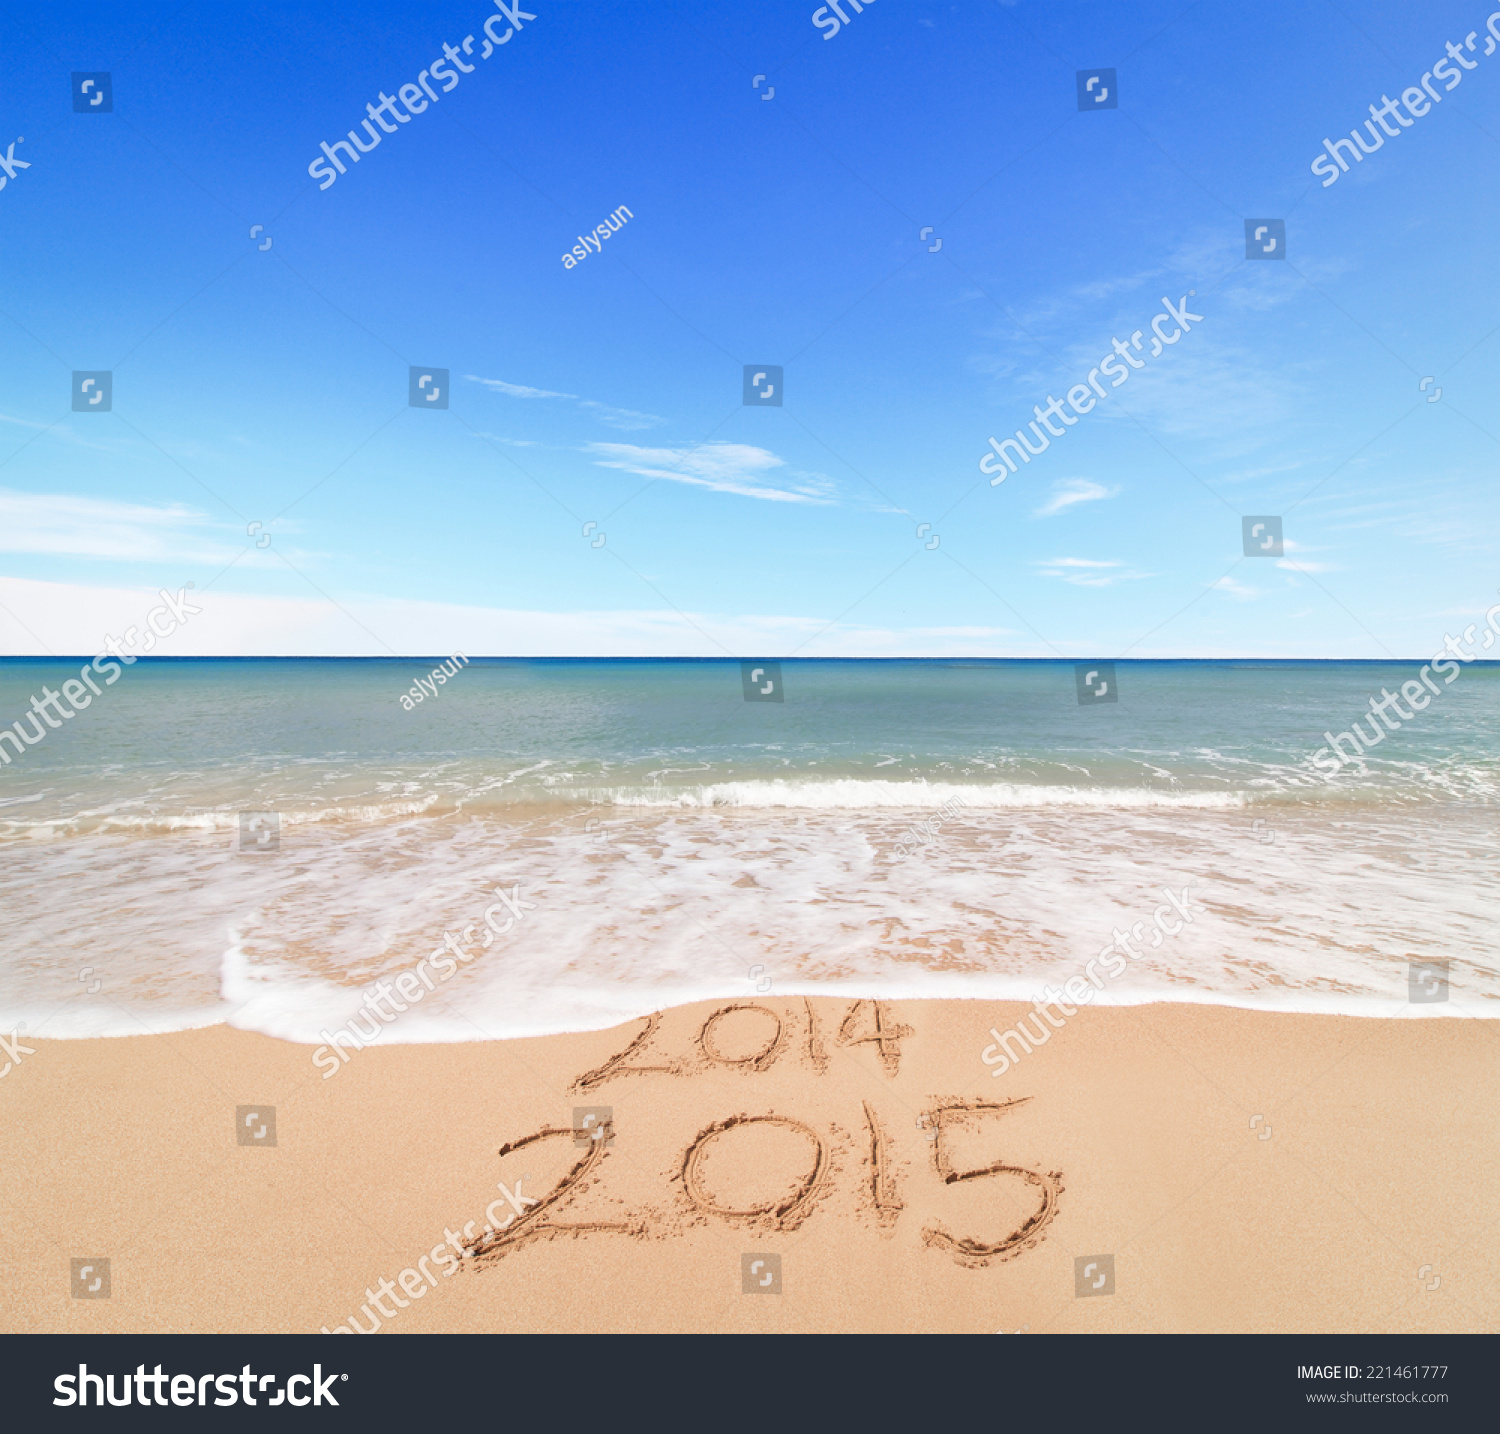 New Year 2015 is coming concept - inscription 2014 and 2015 on a beach sand, the wave is covering digits 2014 #221461777